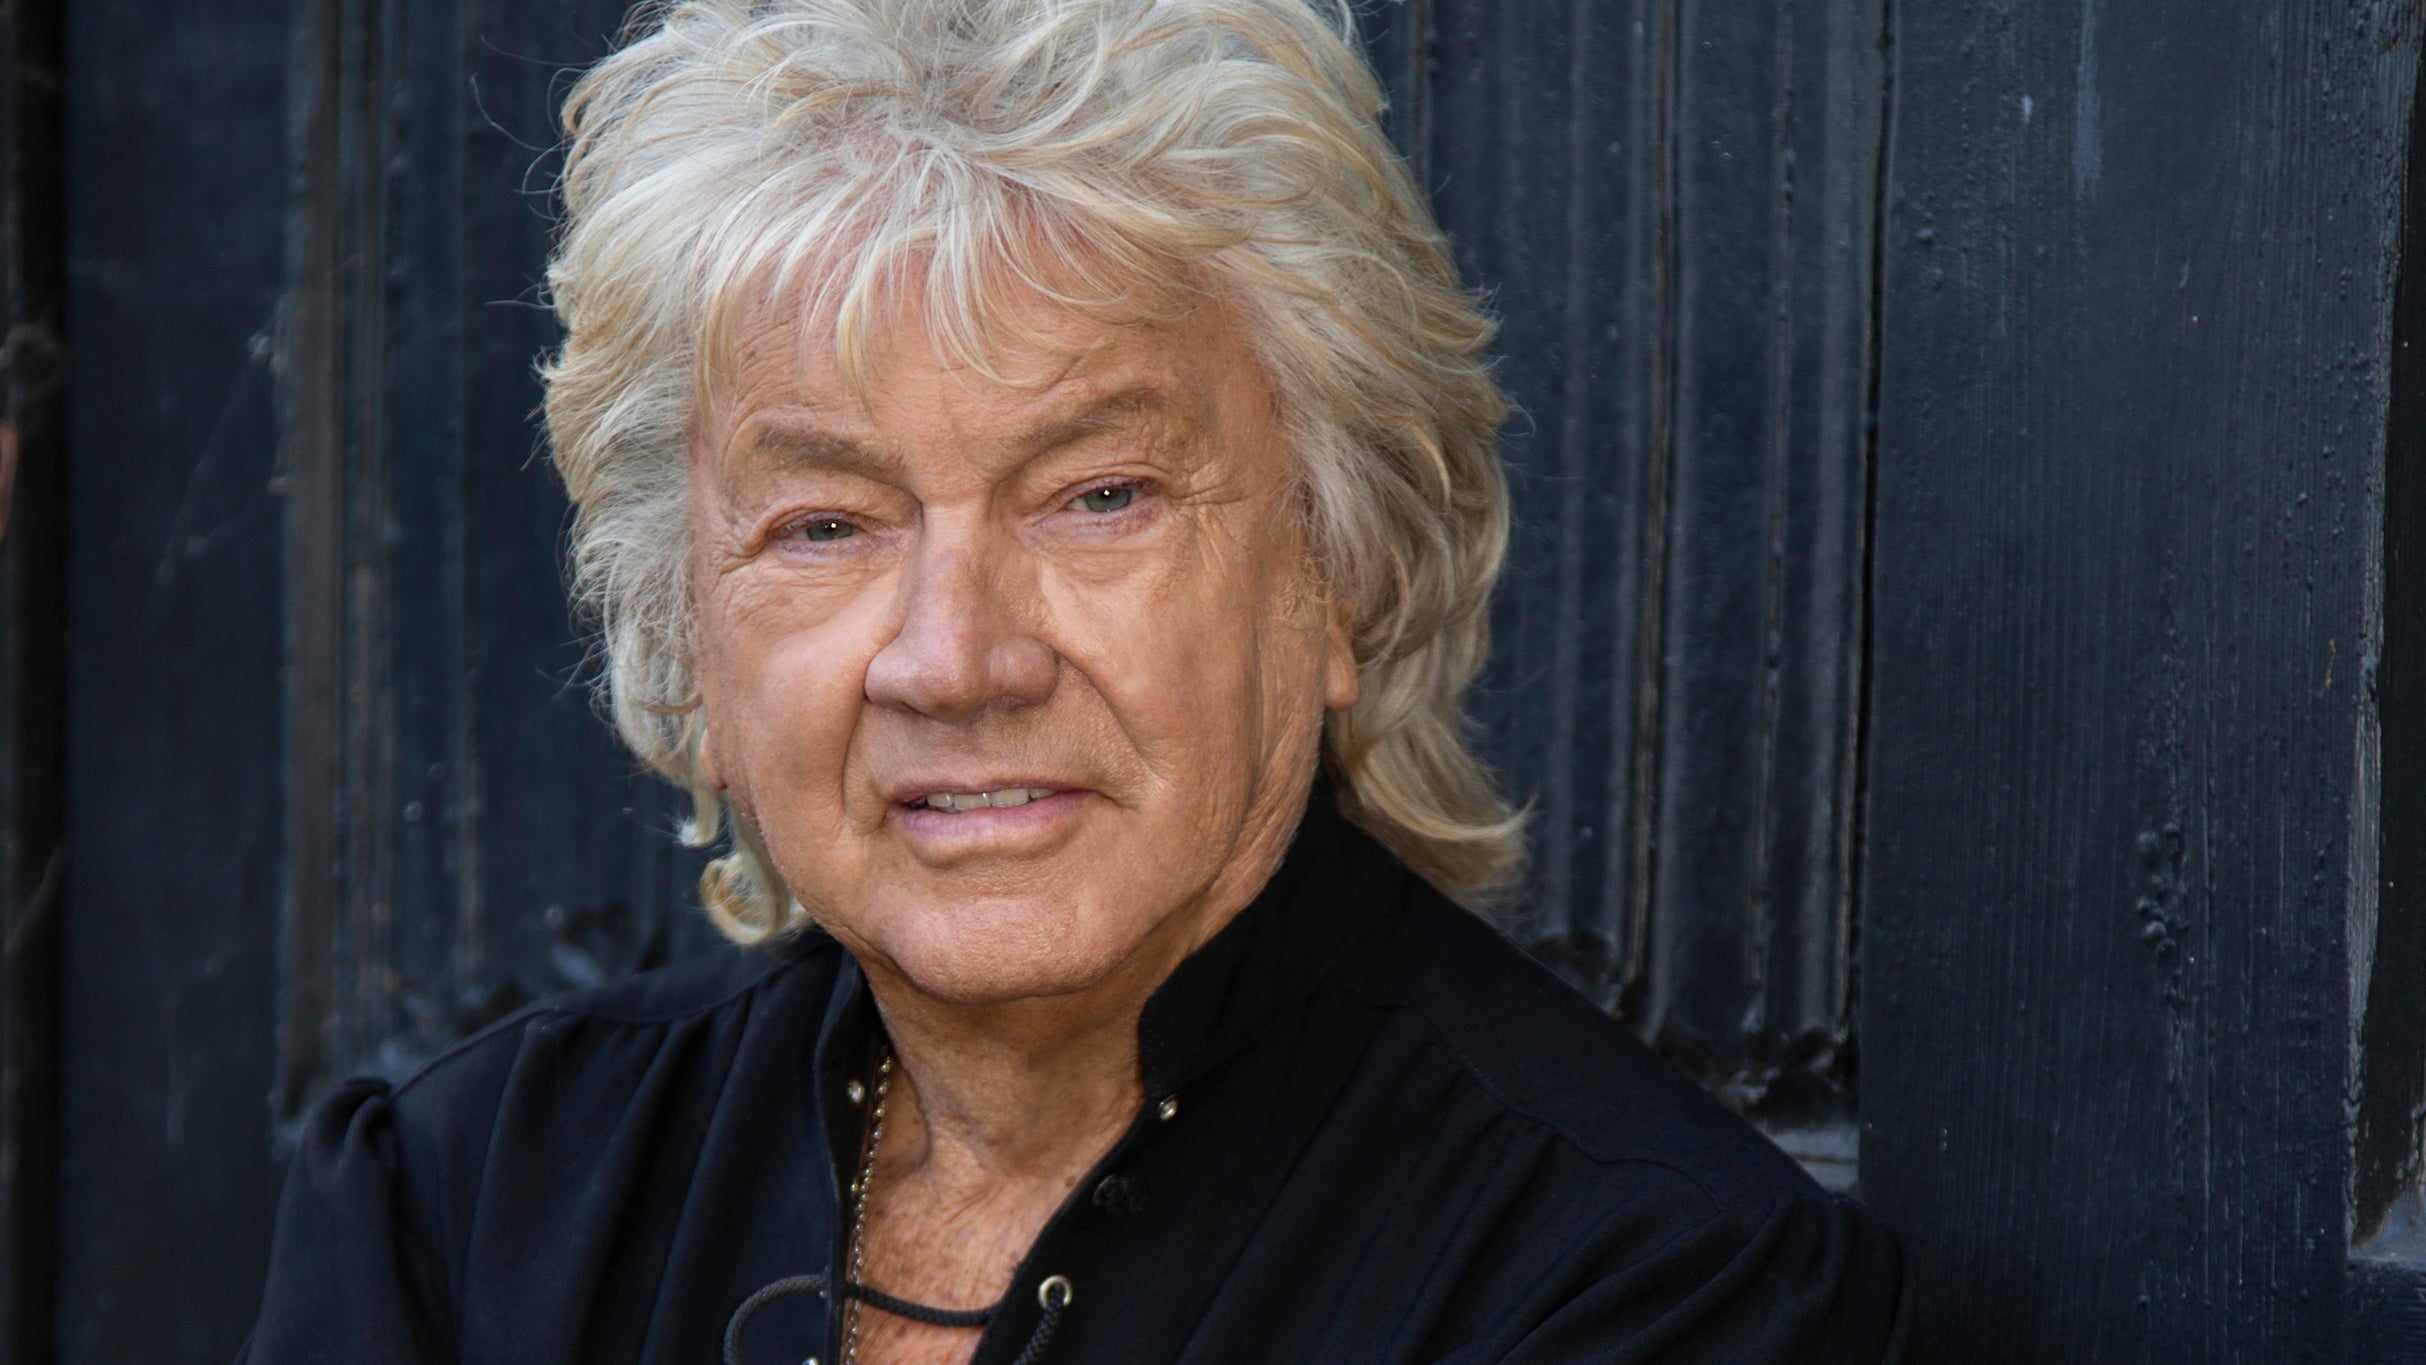 The Moody Blues' John Lodge in Ft Lauderdale promo photo for Official Platinum presale offer code